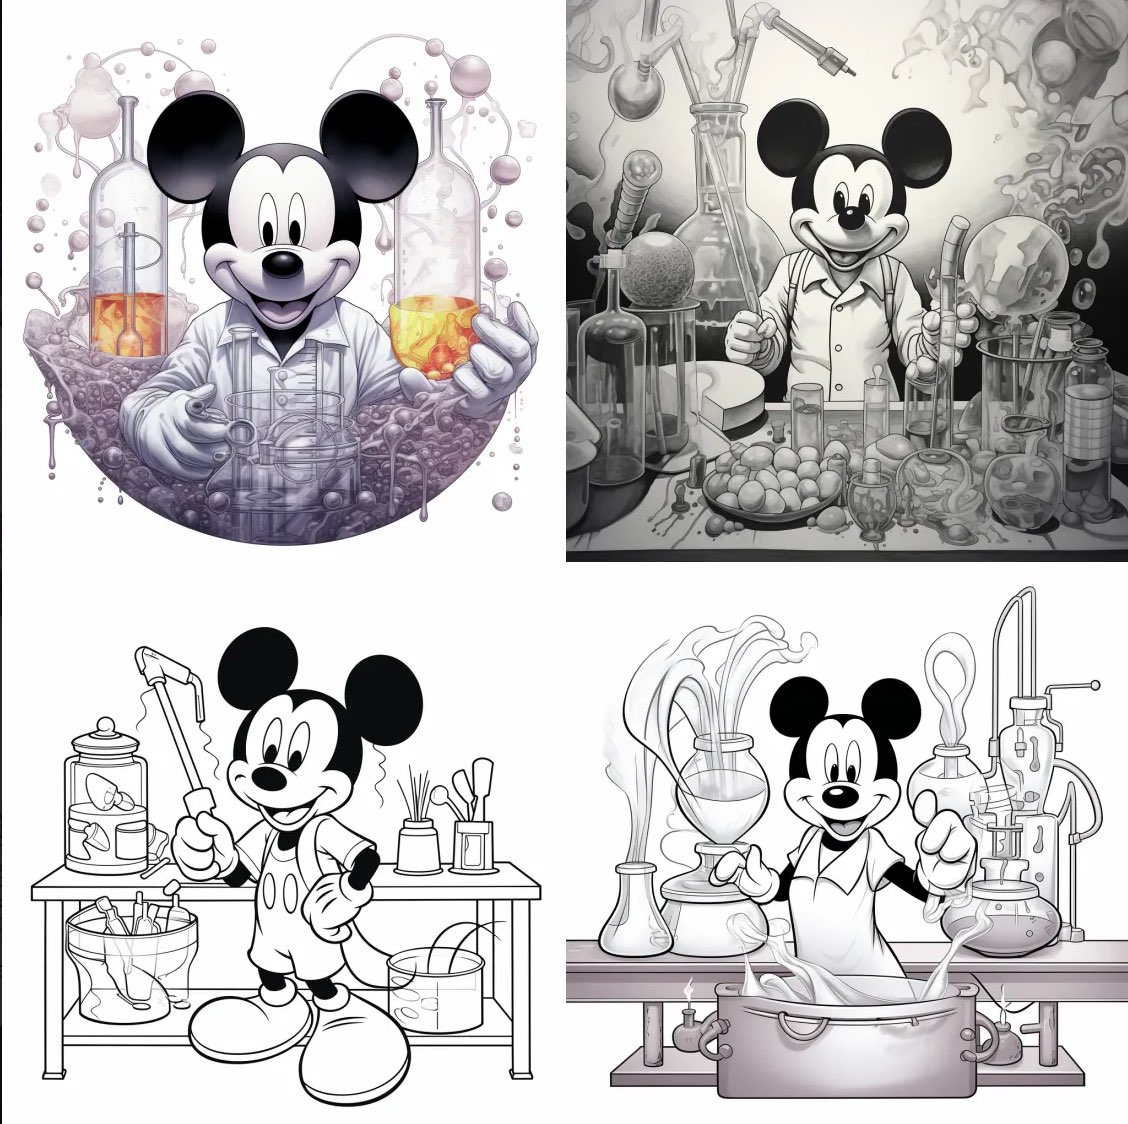 mickey mouse in breaking bad meth lab, coloring book for adults, no detail, outline no colour